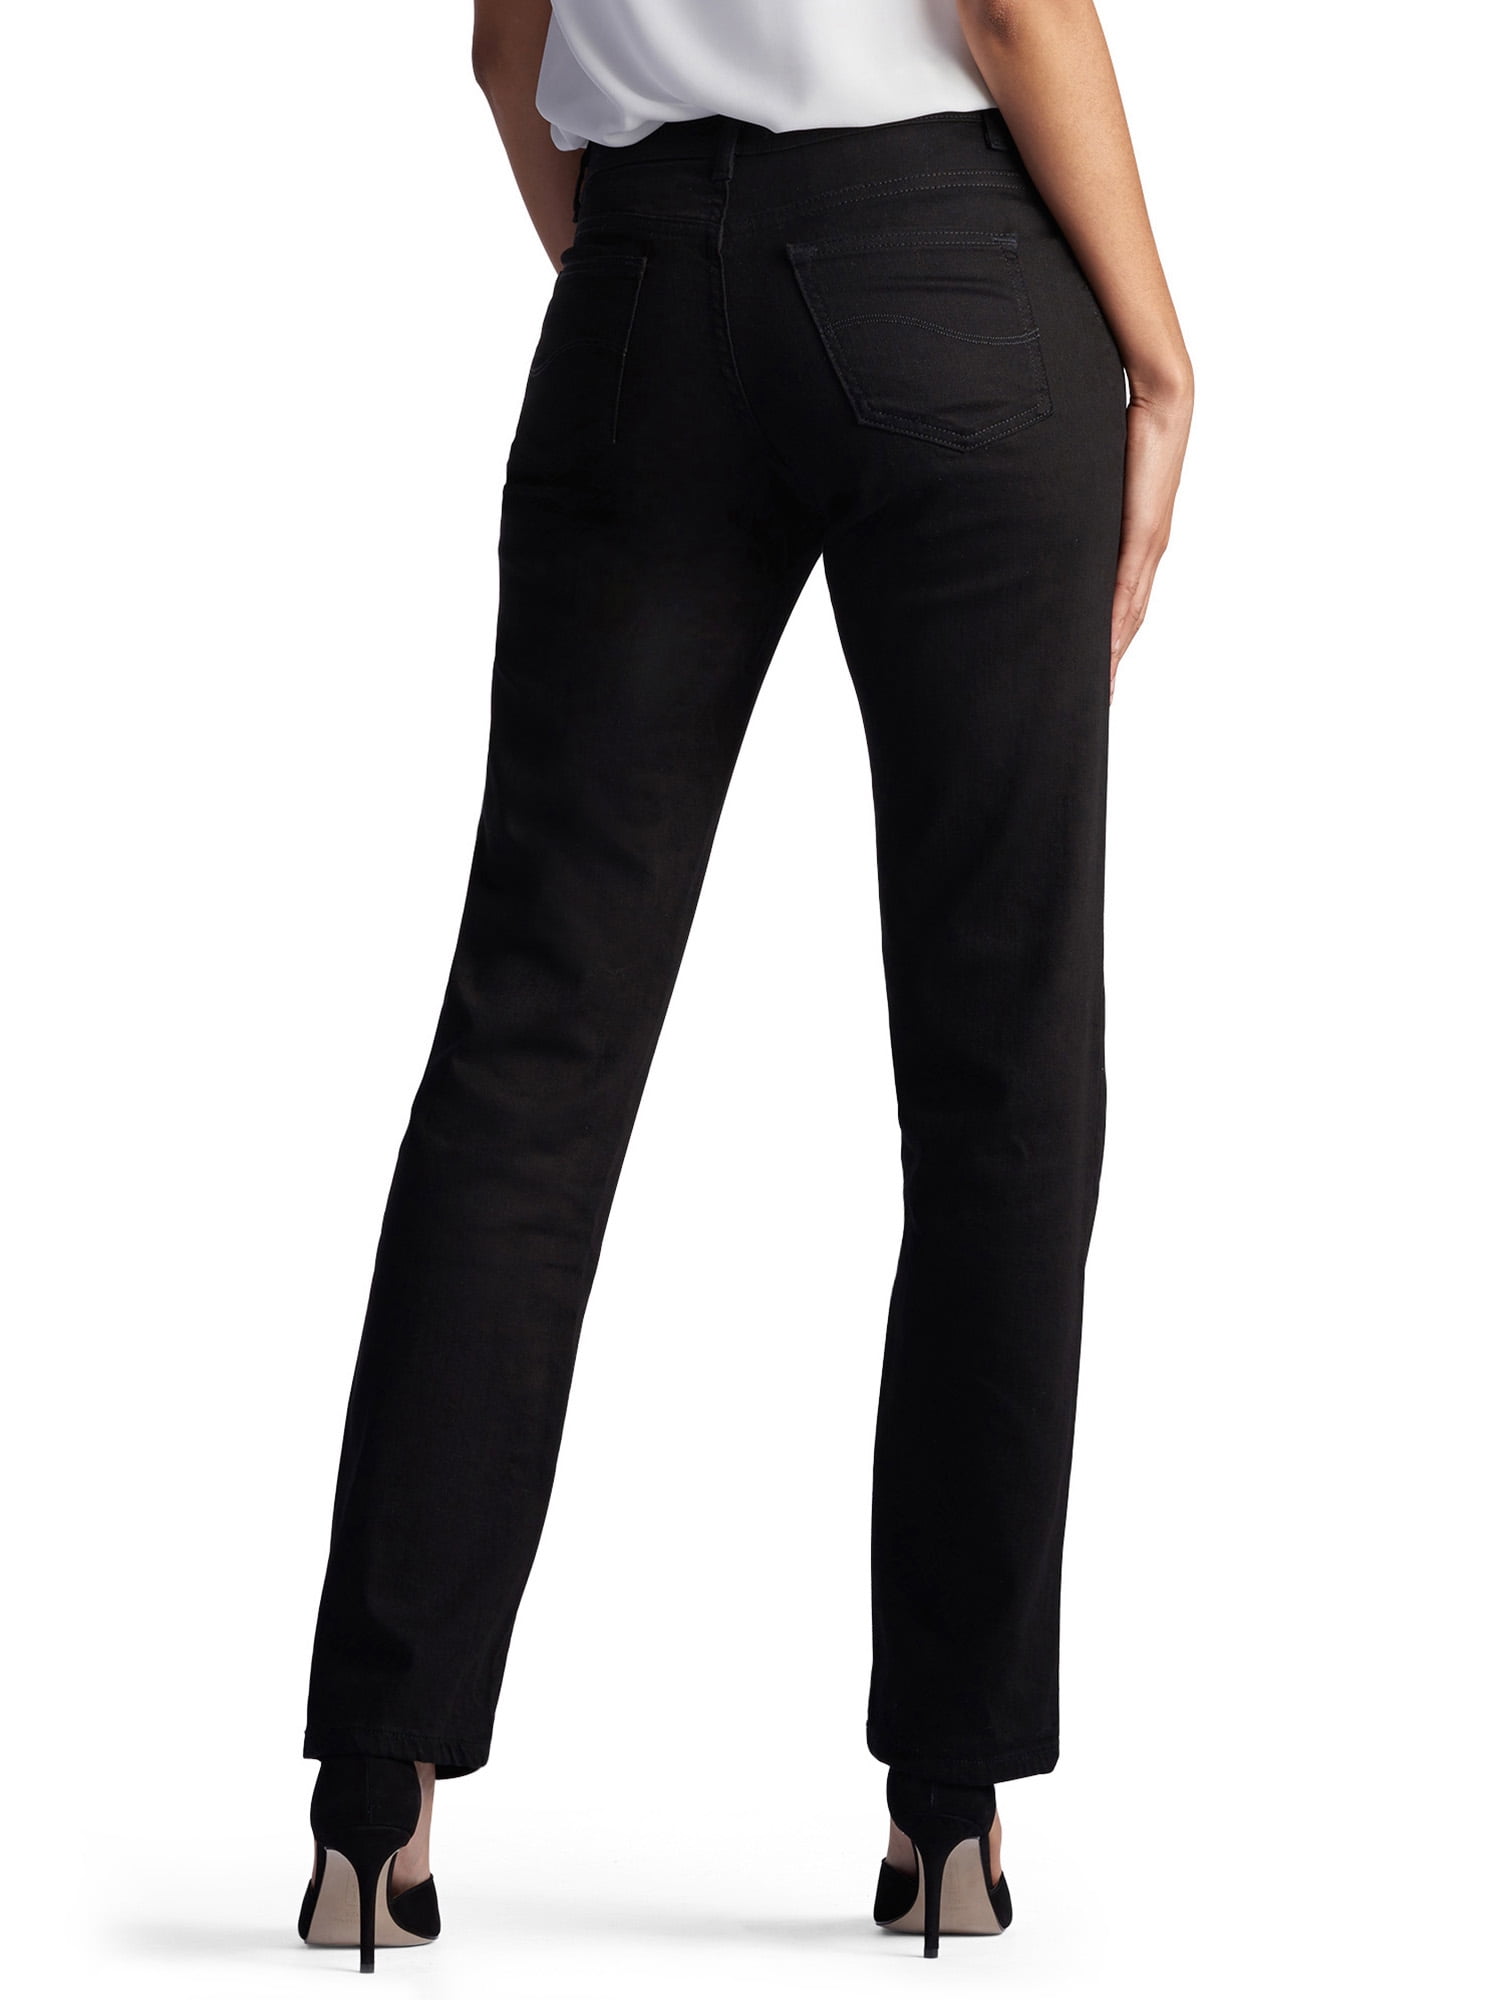 Lee Jeans: Women's 3054039 Bewitched Stretch Relaxed Fit Straight Leg Jeans